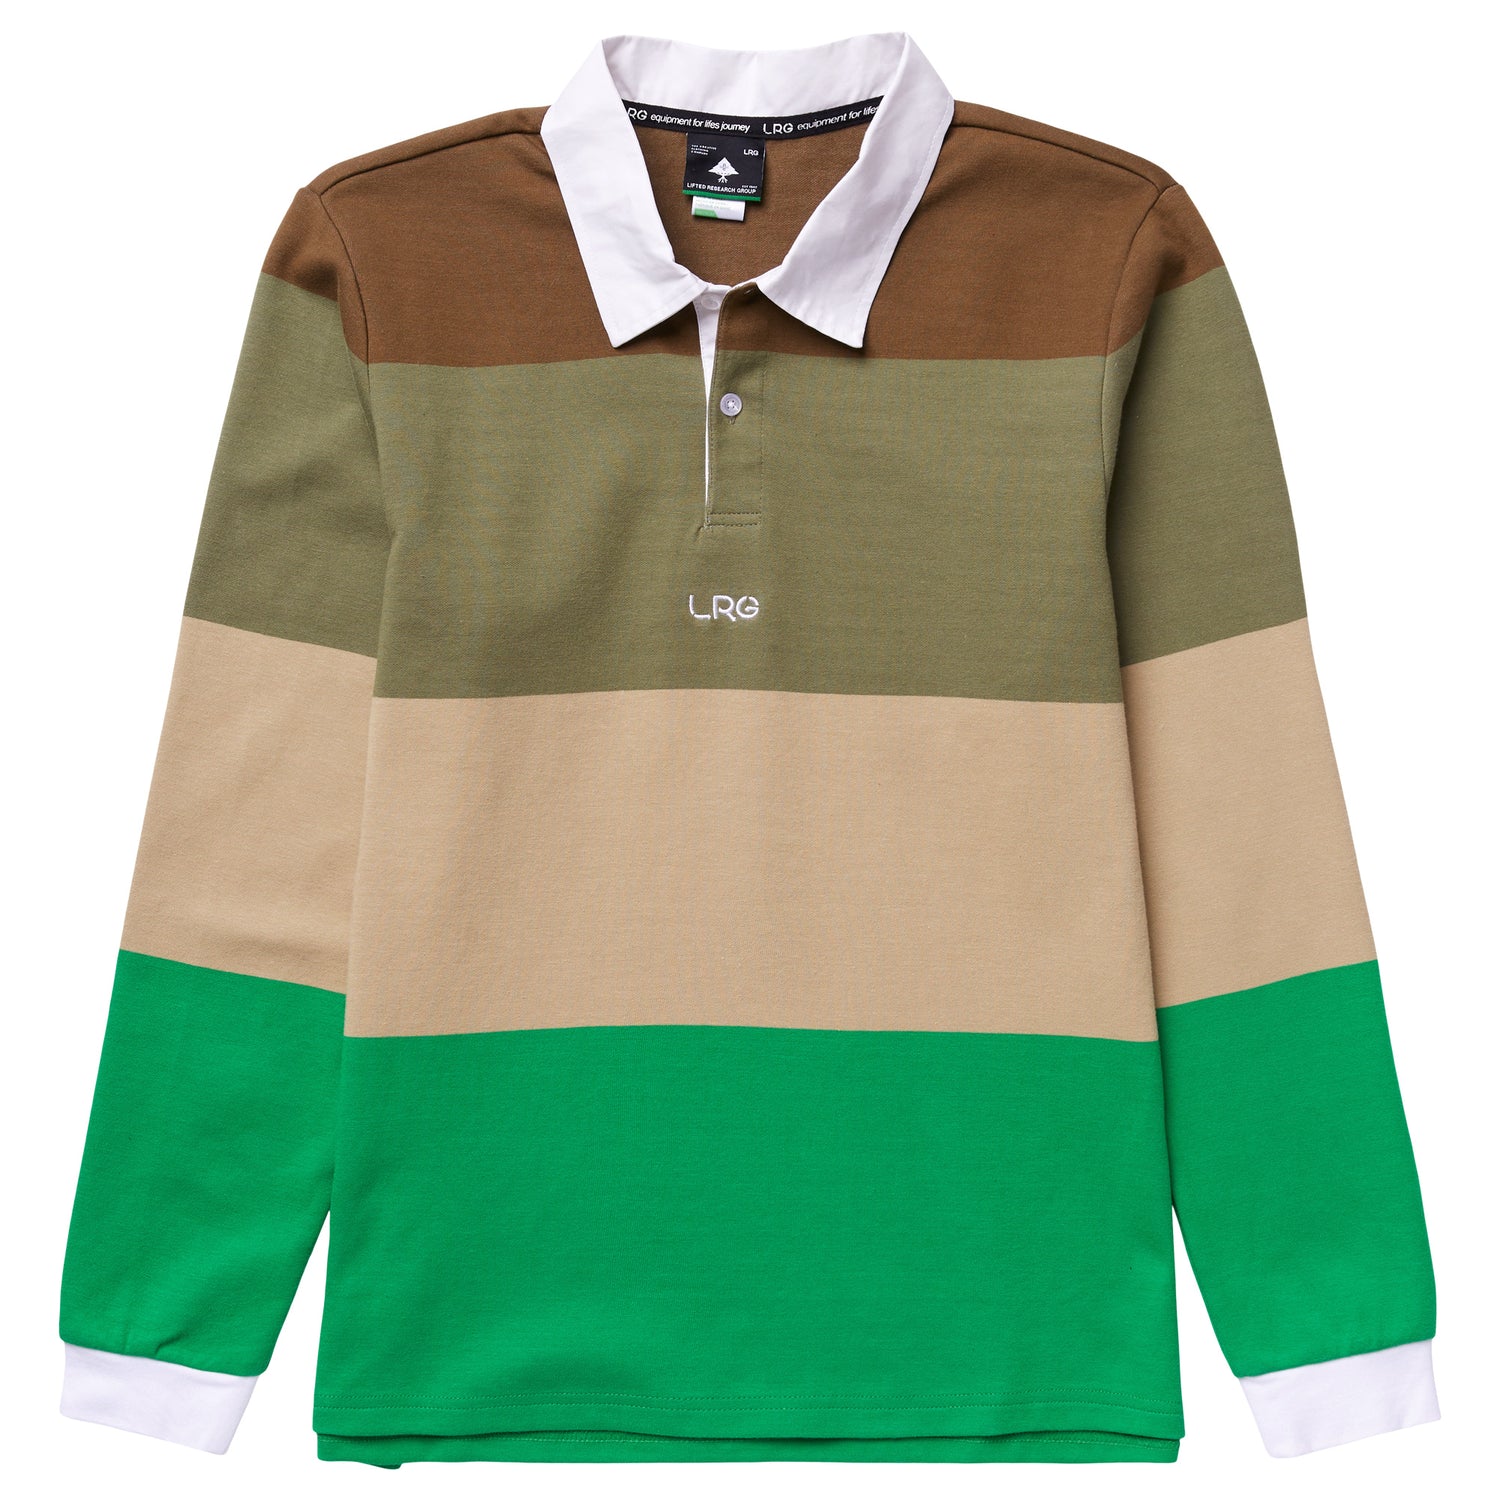 CREATIVE WOODS RUGBY SHIRT - GREEN